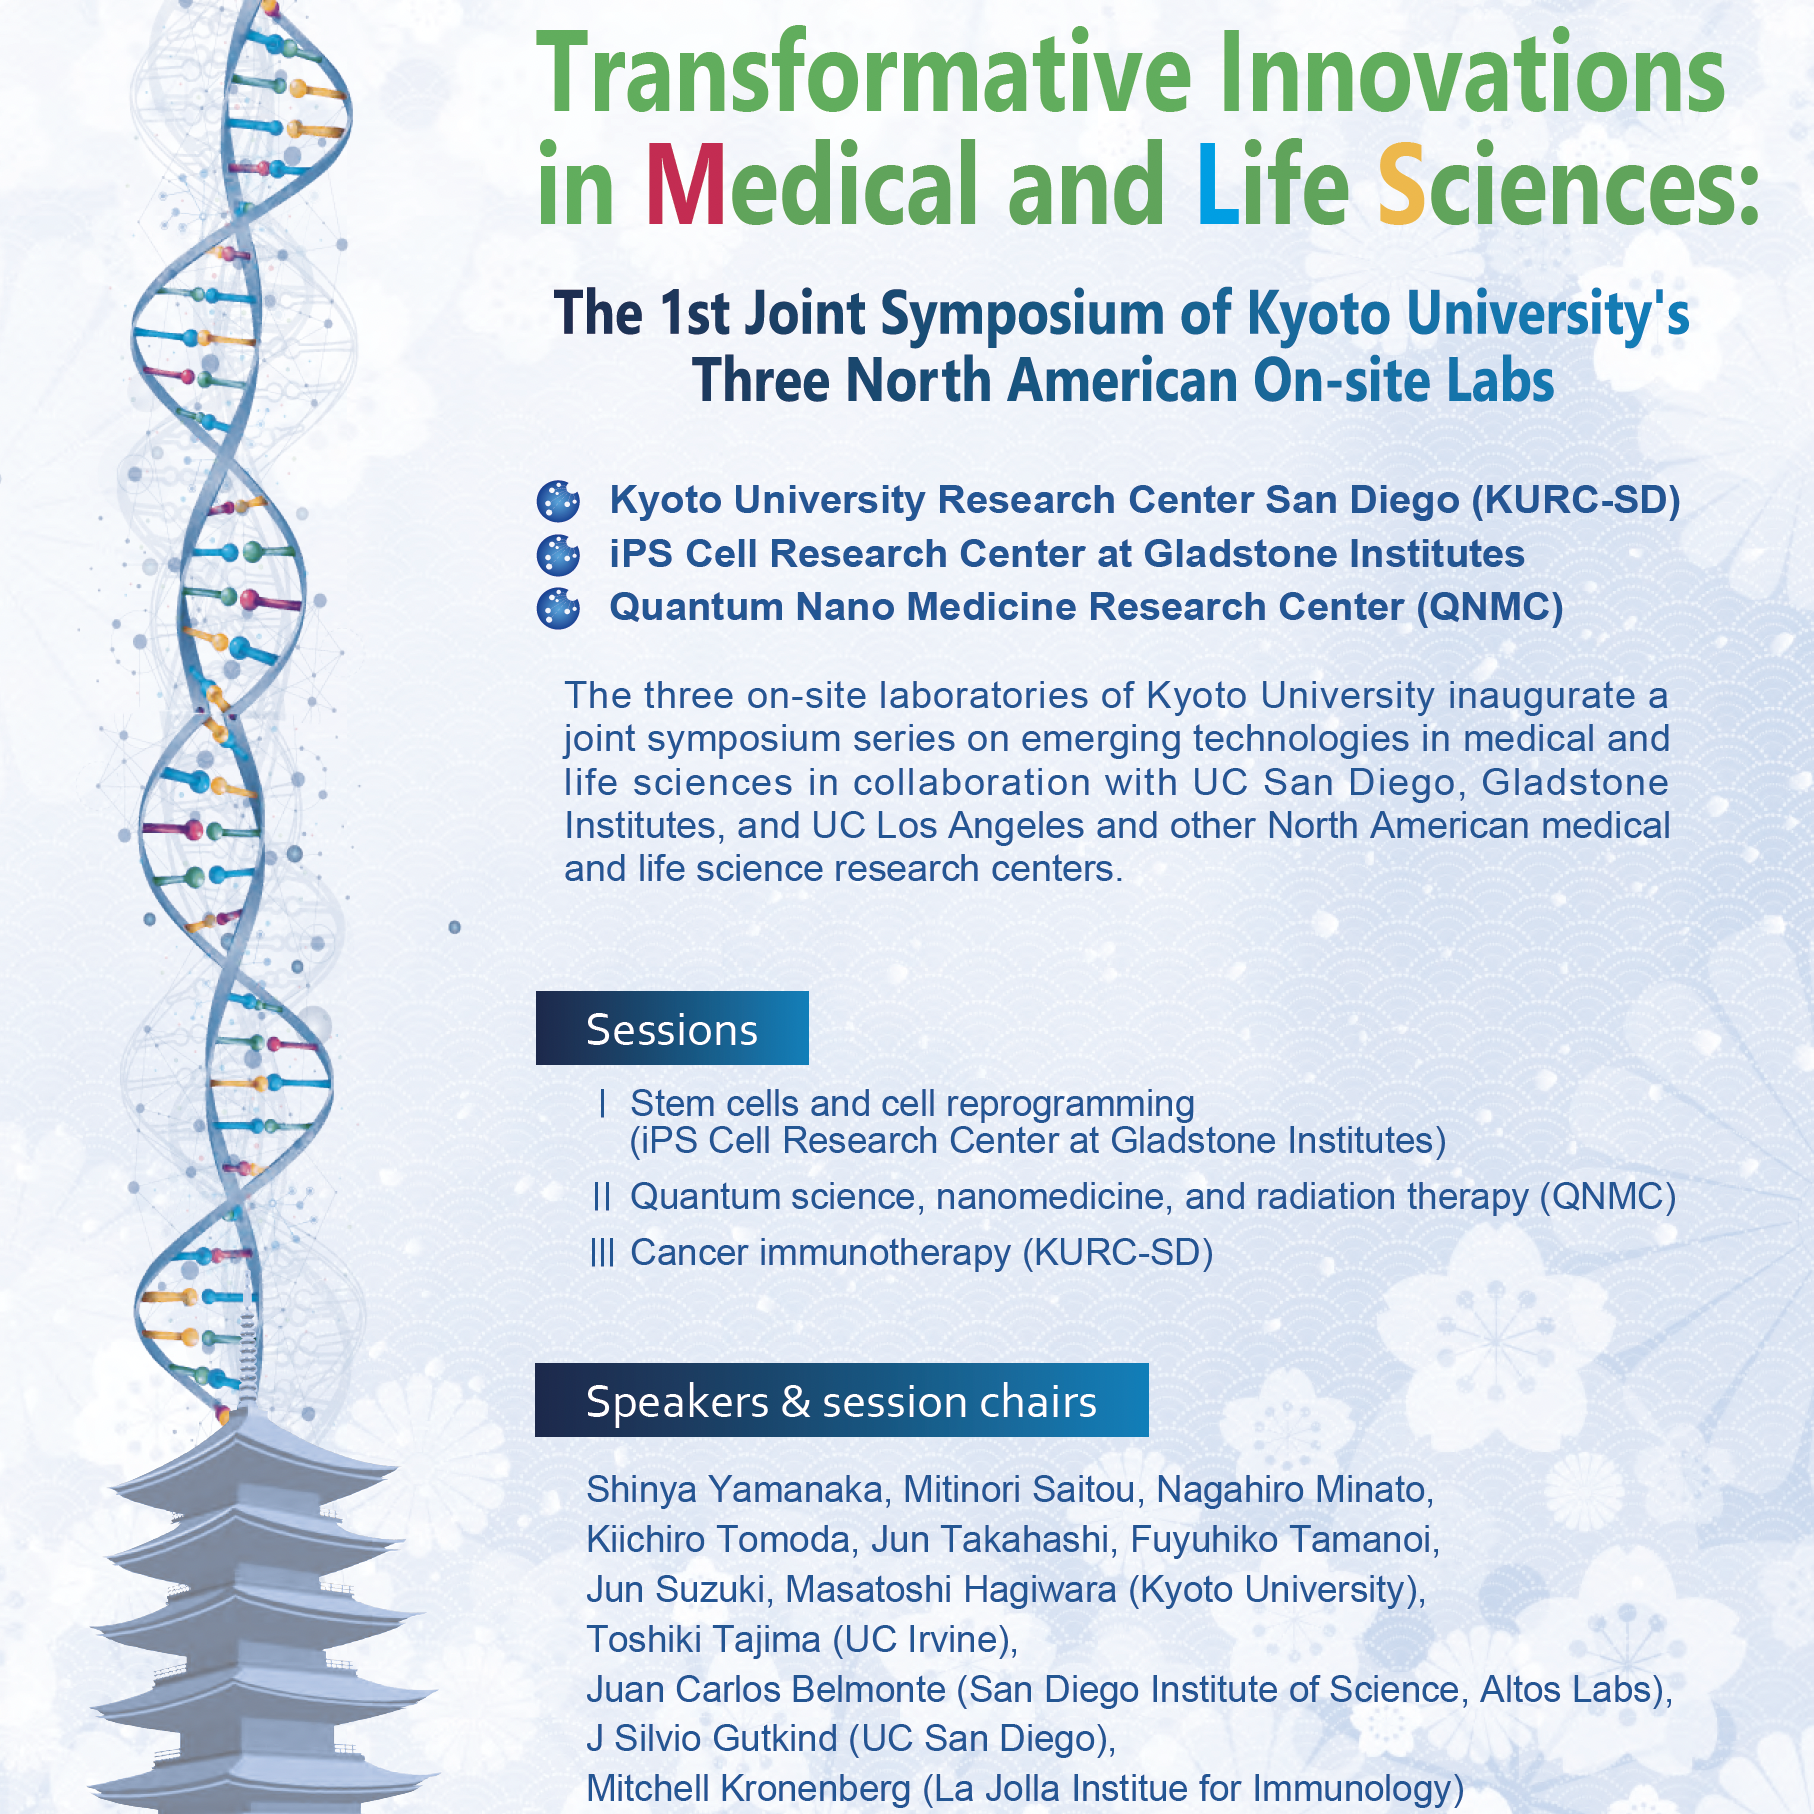 ASHBi Director will give keynote speech at the 1st Joint Symposium of Kyoto University’s Three North American On-site Labs